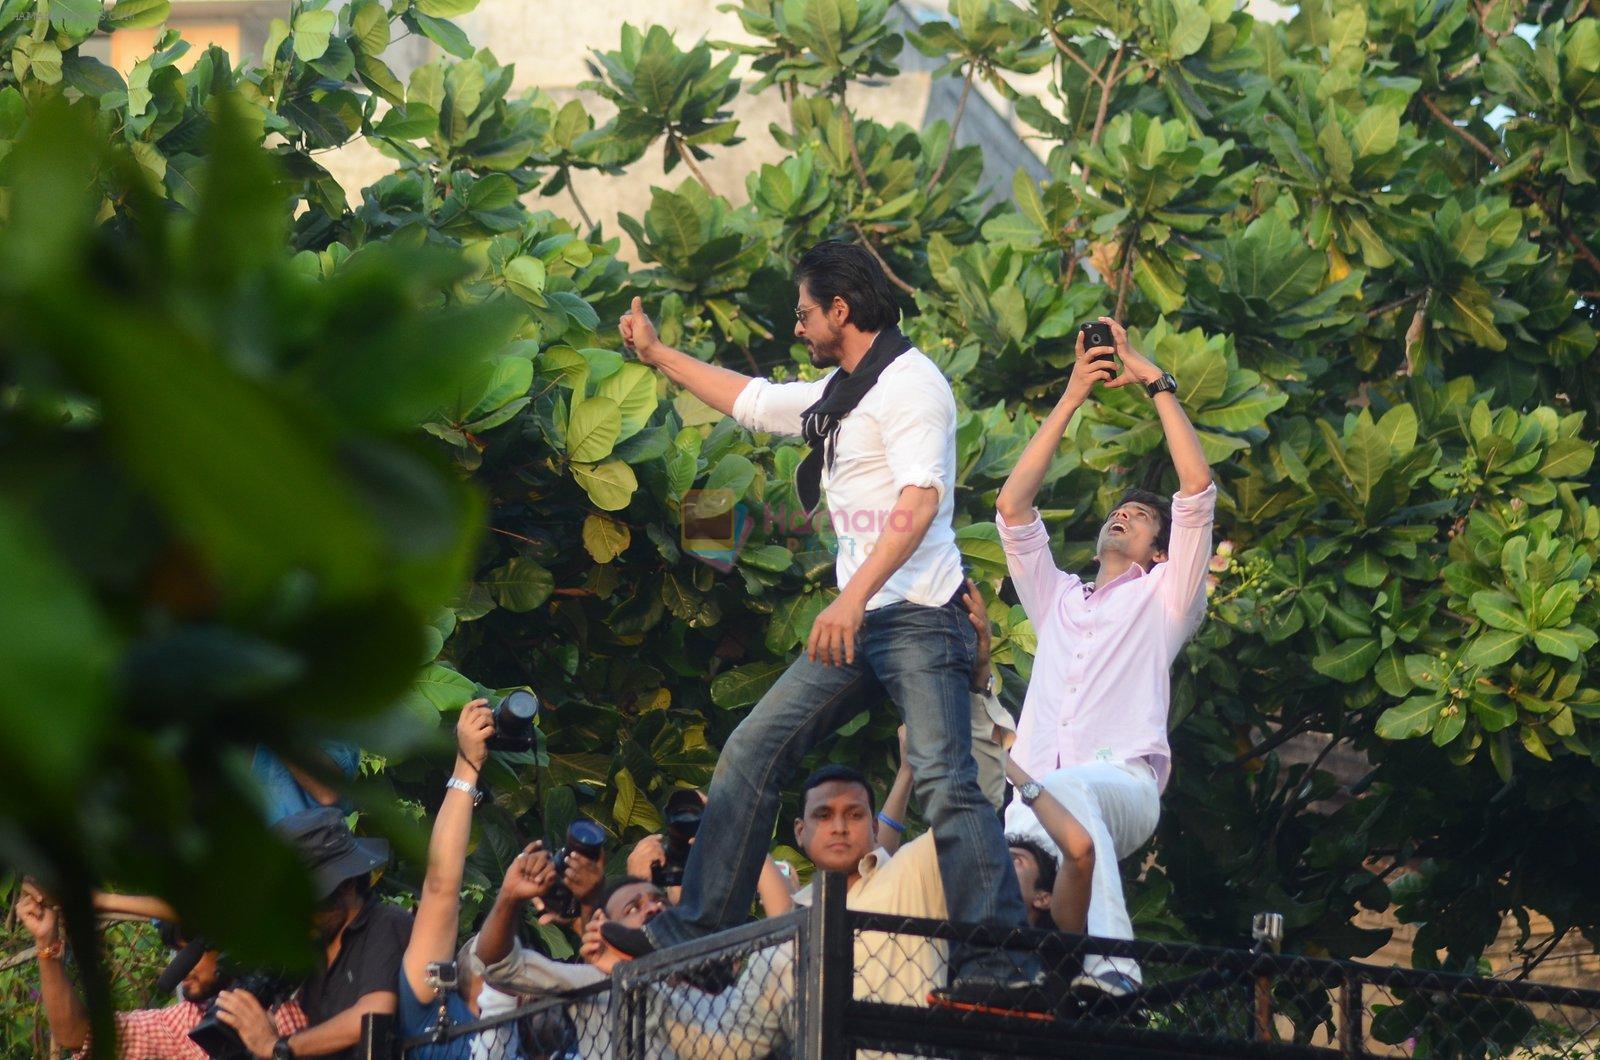 Shahrukh Khan meets fans on the eve of his 50th bday on 2nd Nov 2015